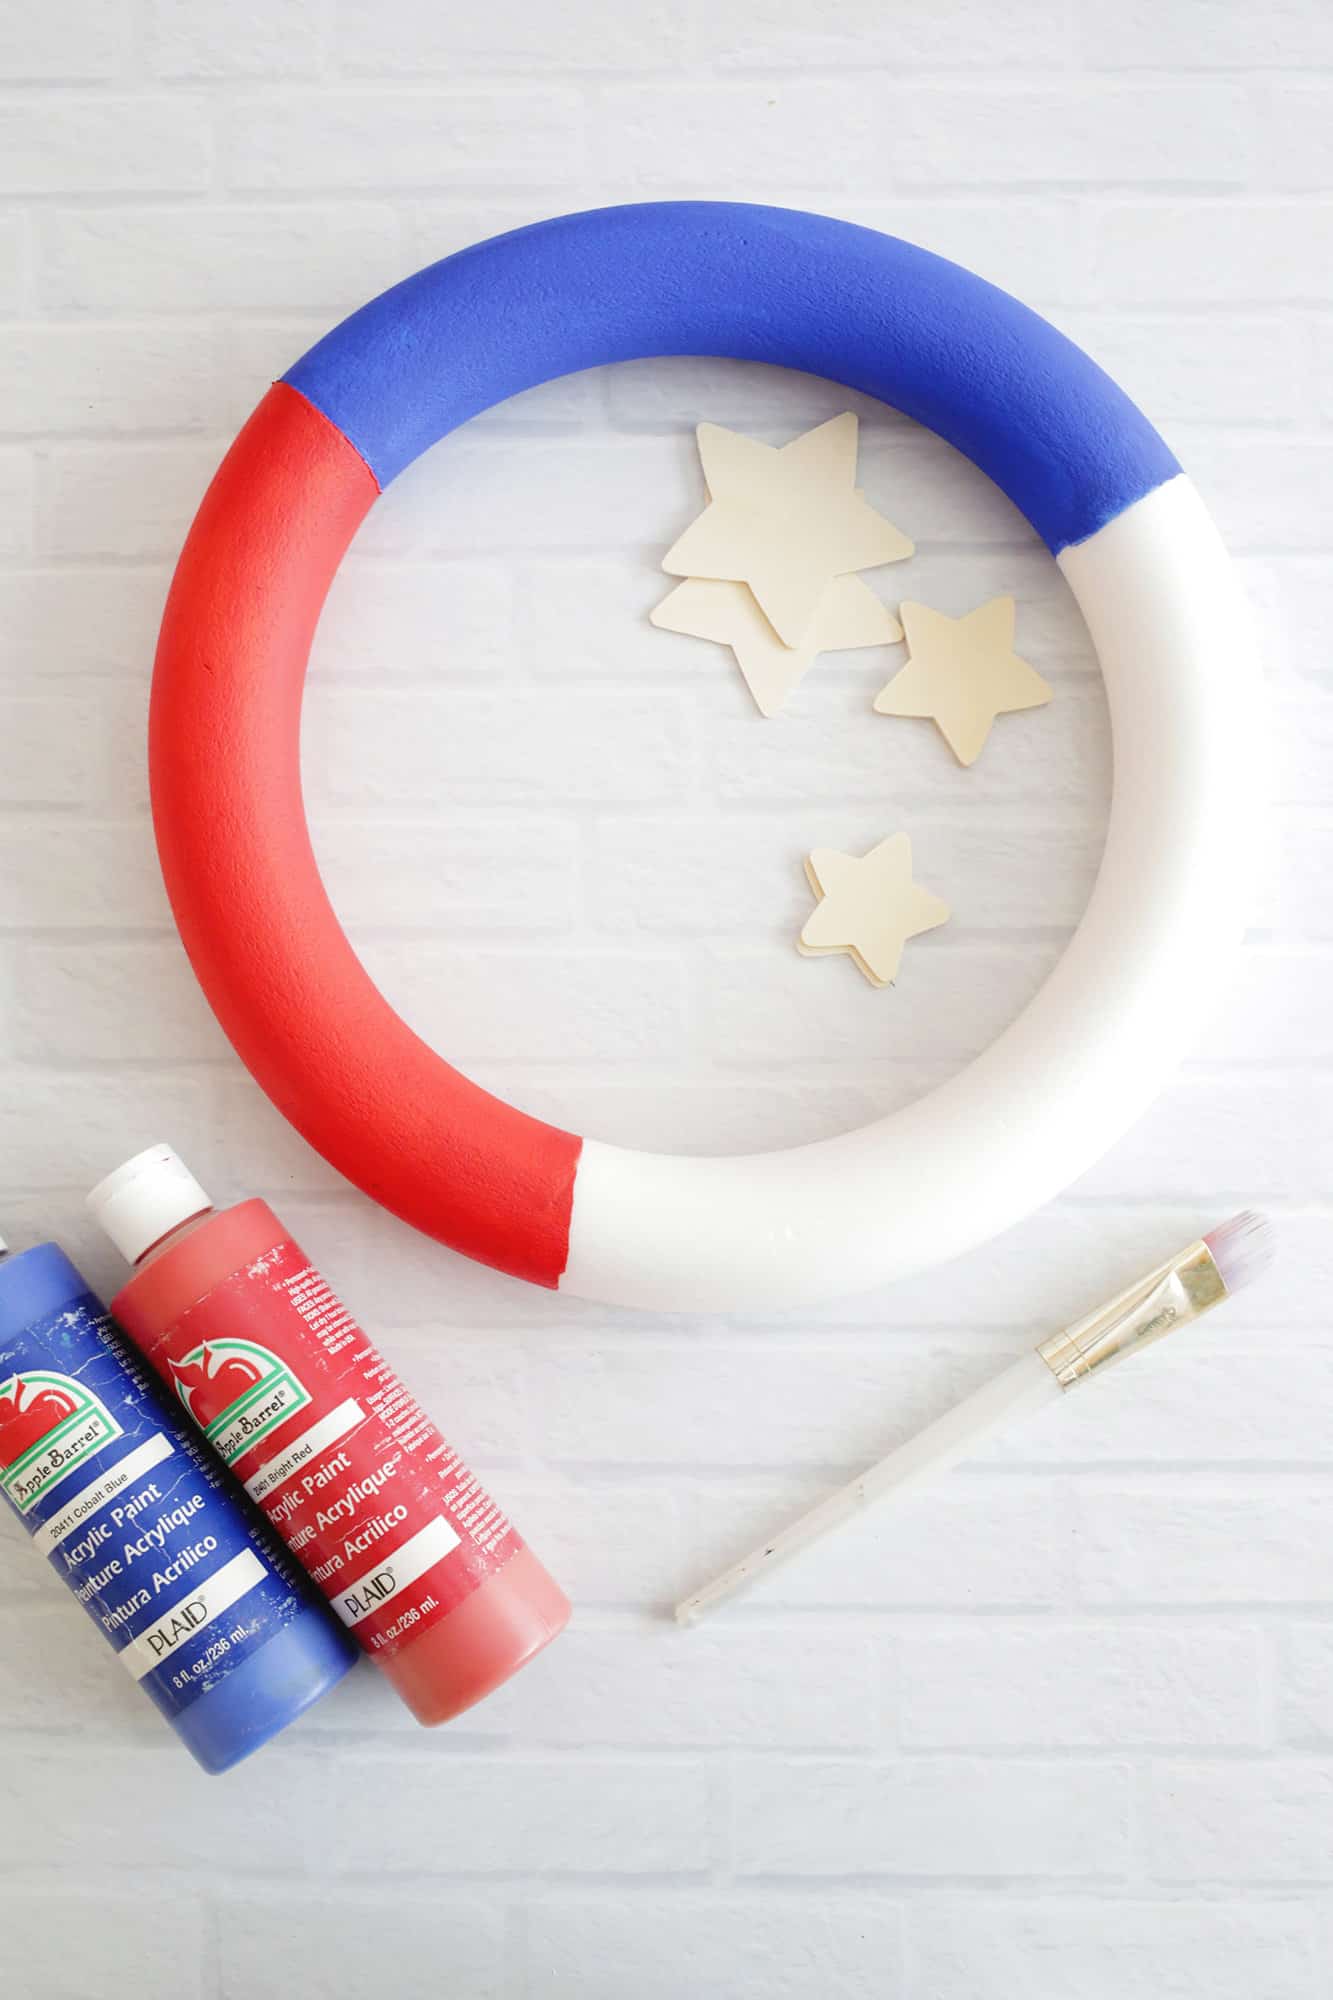 wreath frame divided into red, white, and blue sections